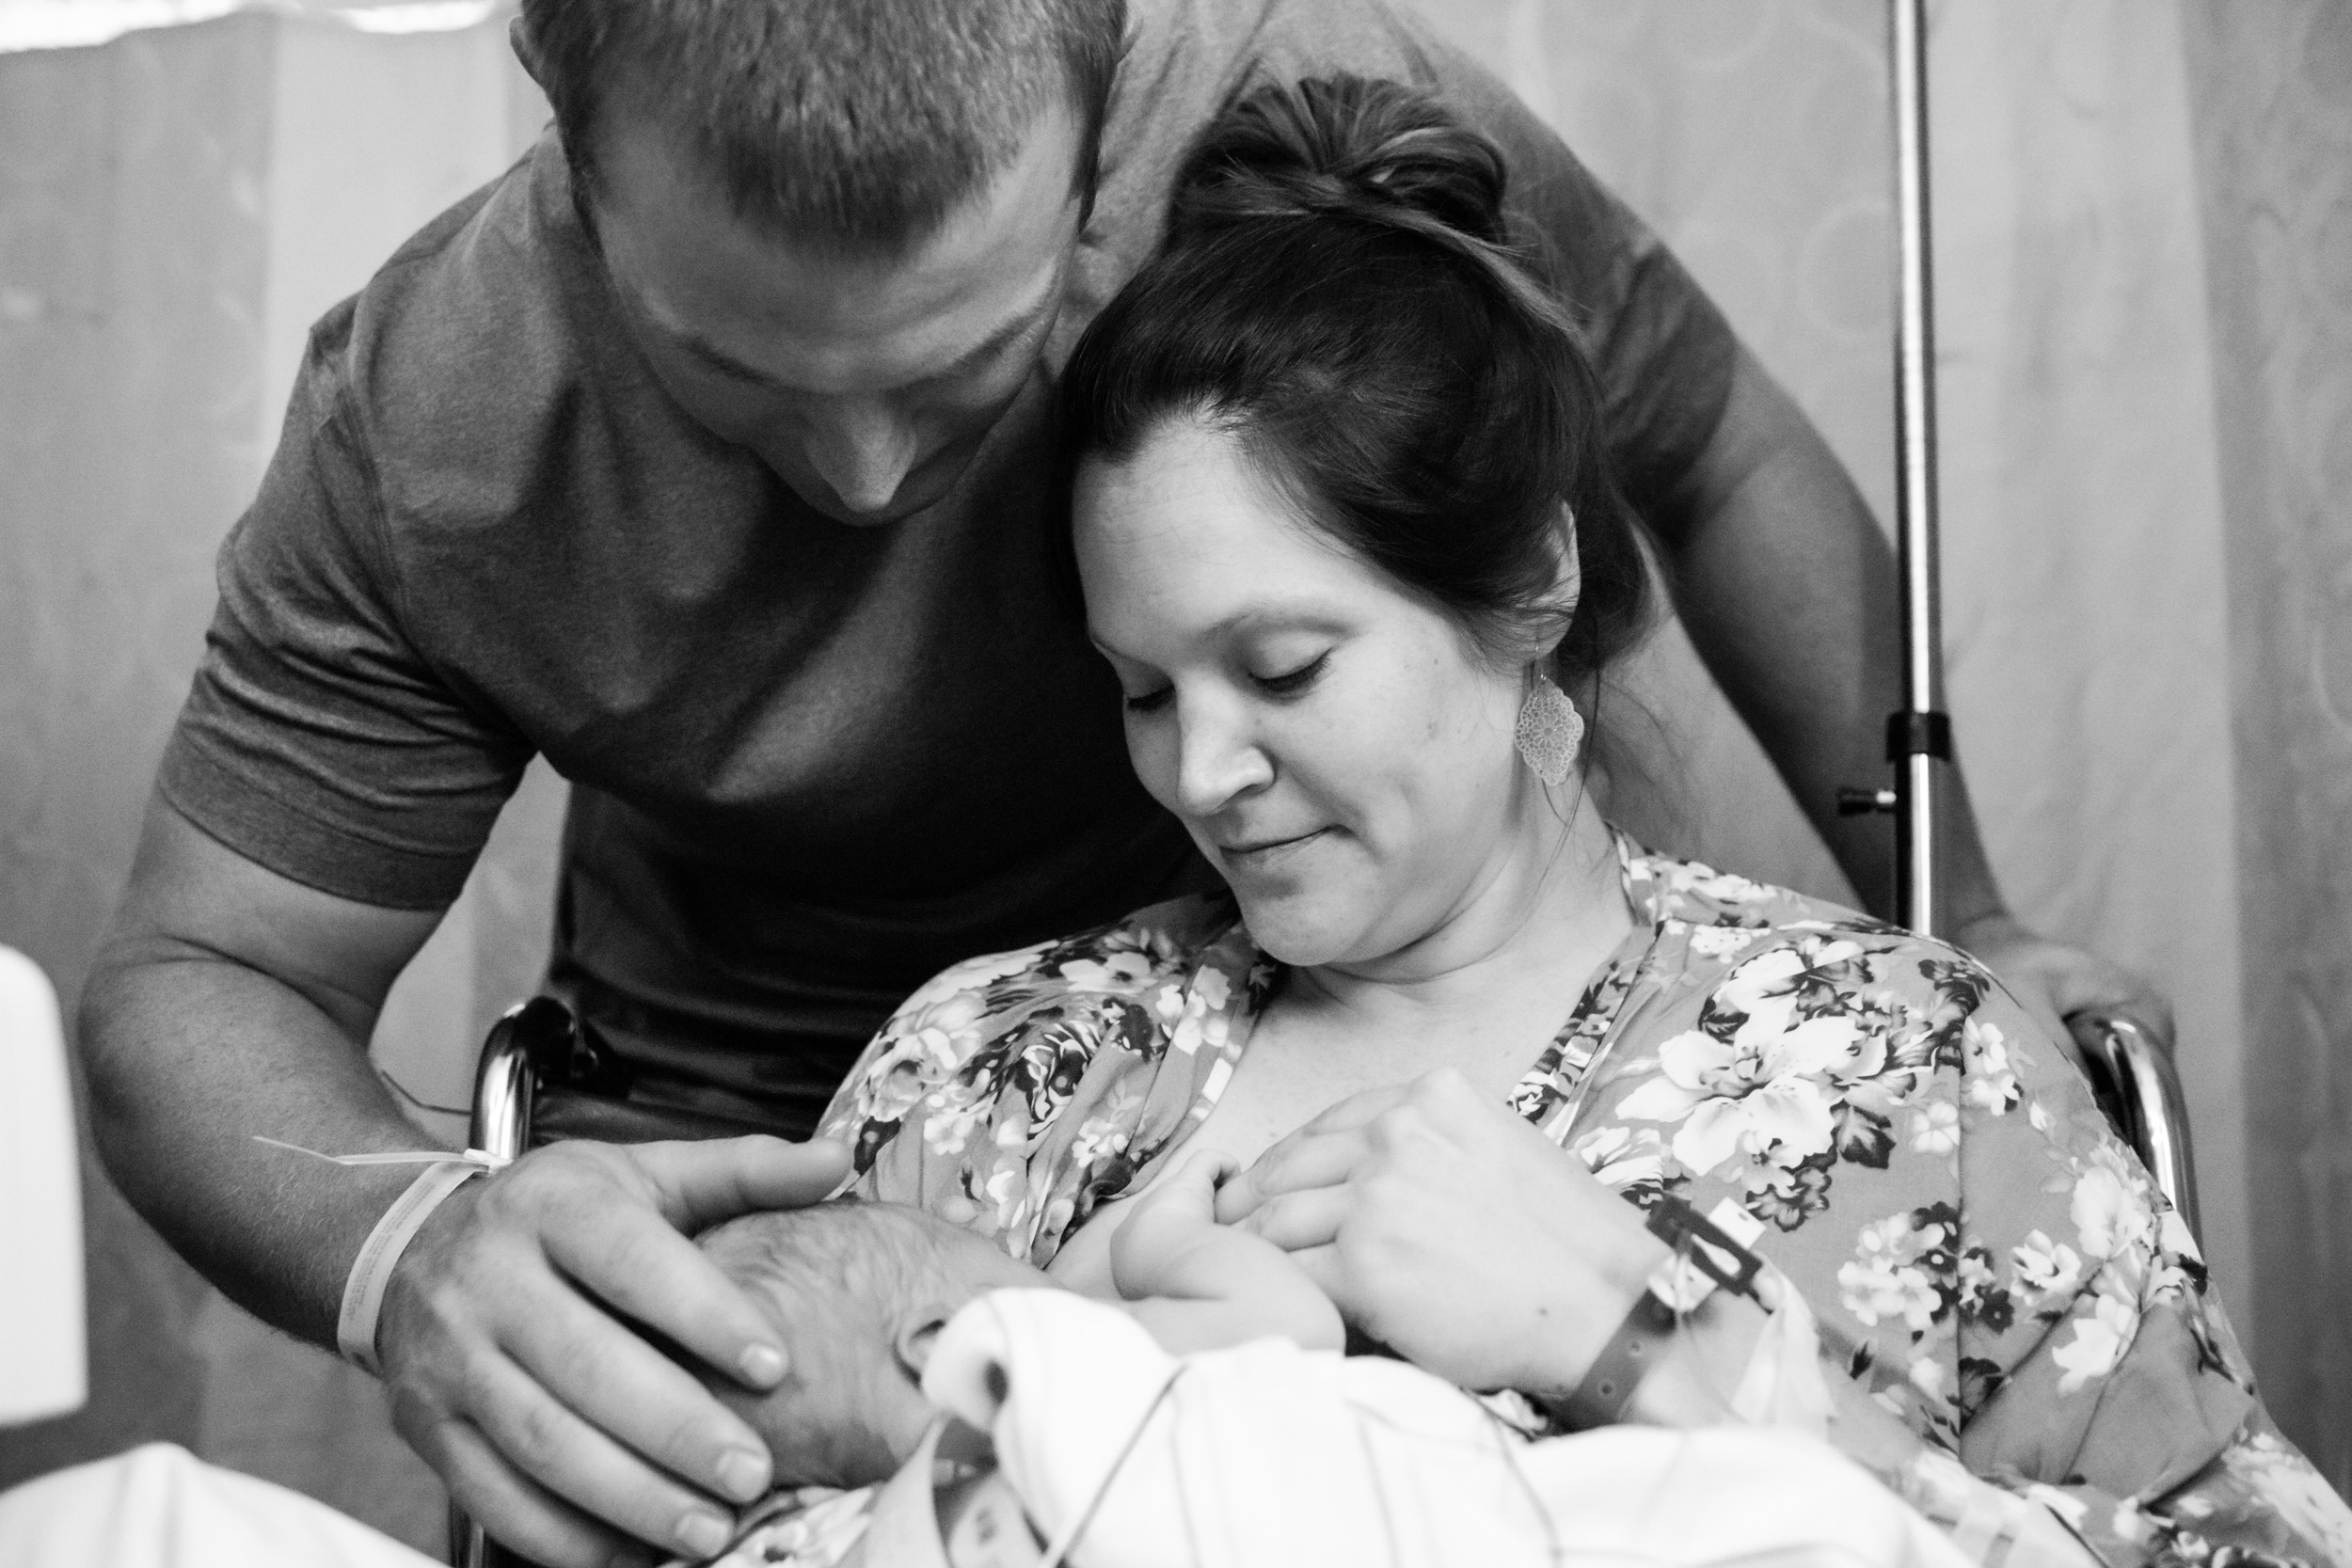 gainesville mom and dad admiring their sweet newborn baby during his short stay in the nicu